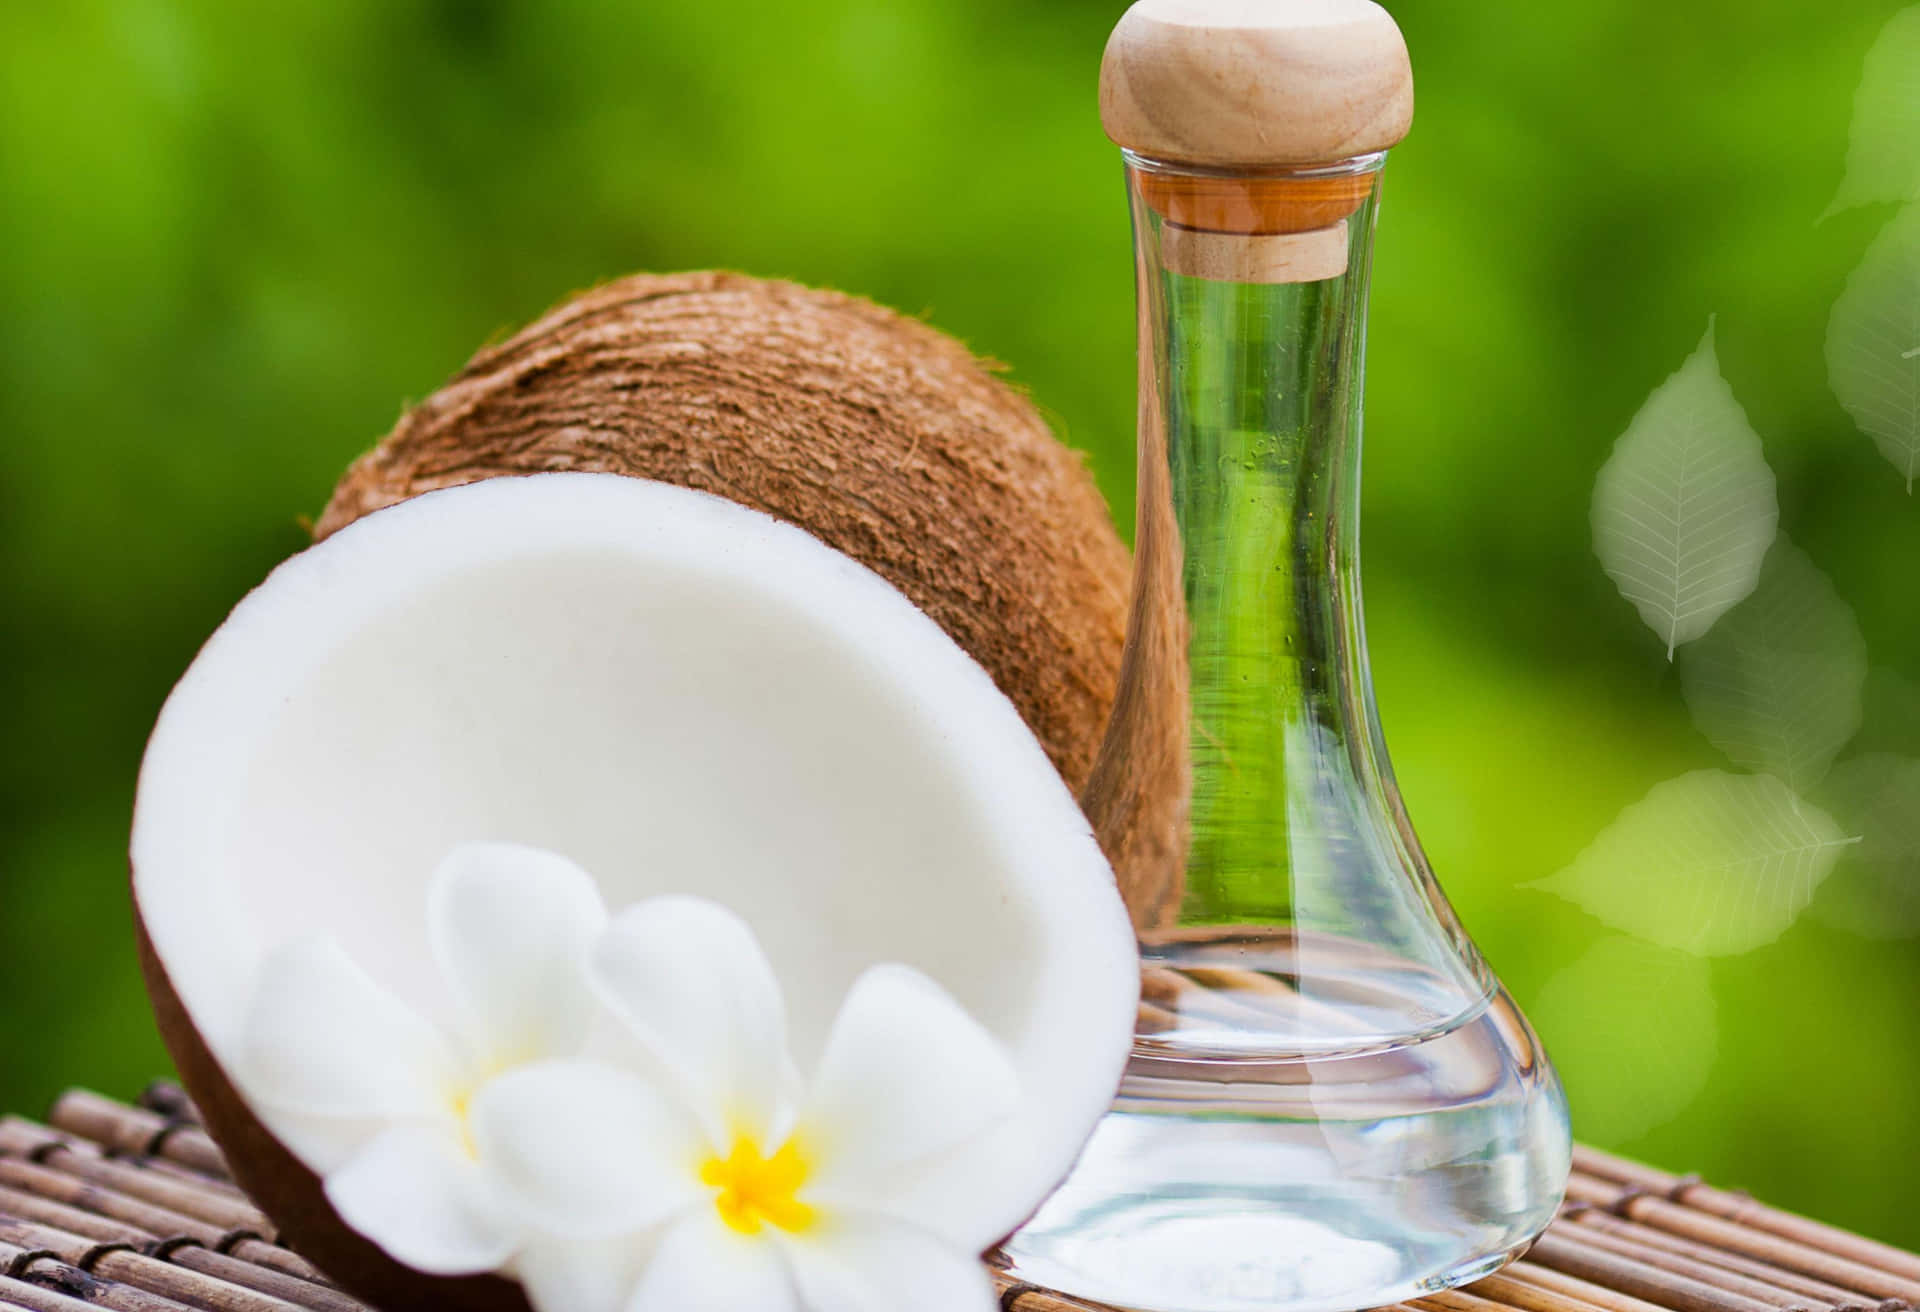 Coconut Oil And Flower On A Wooden Table